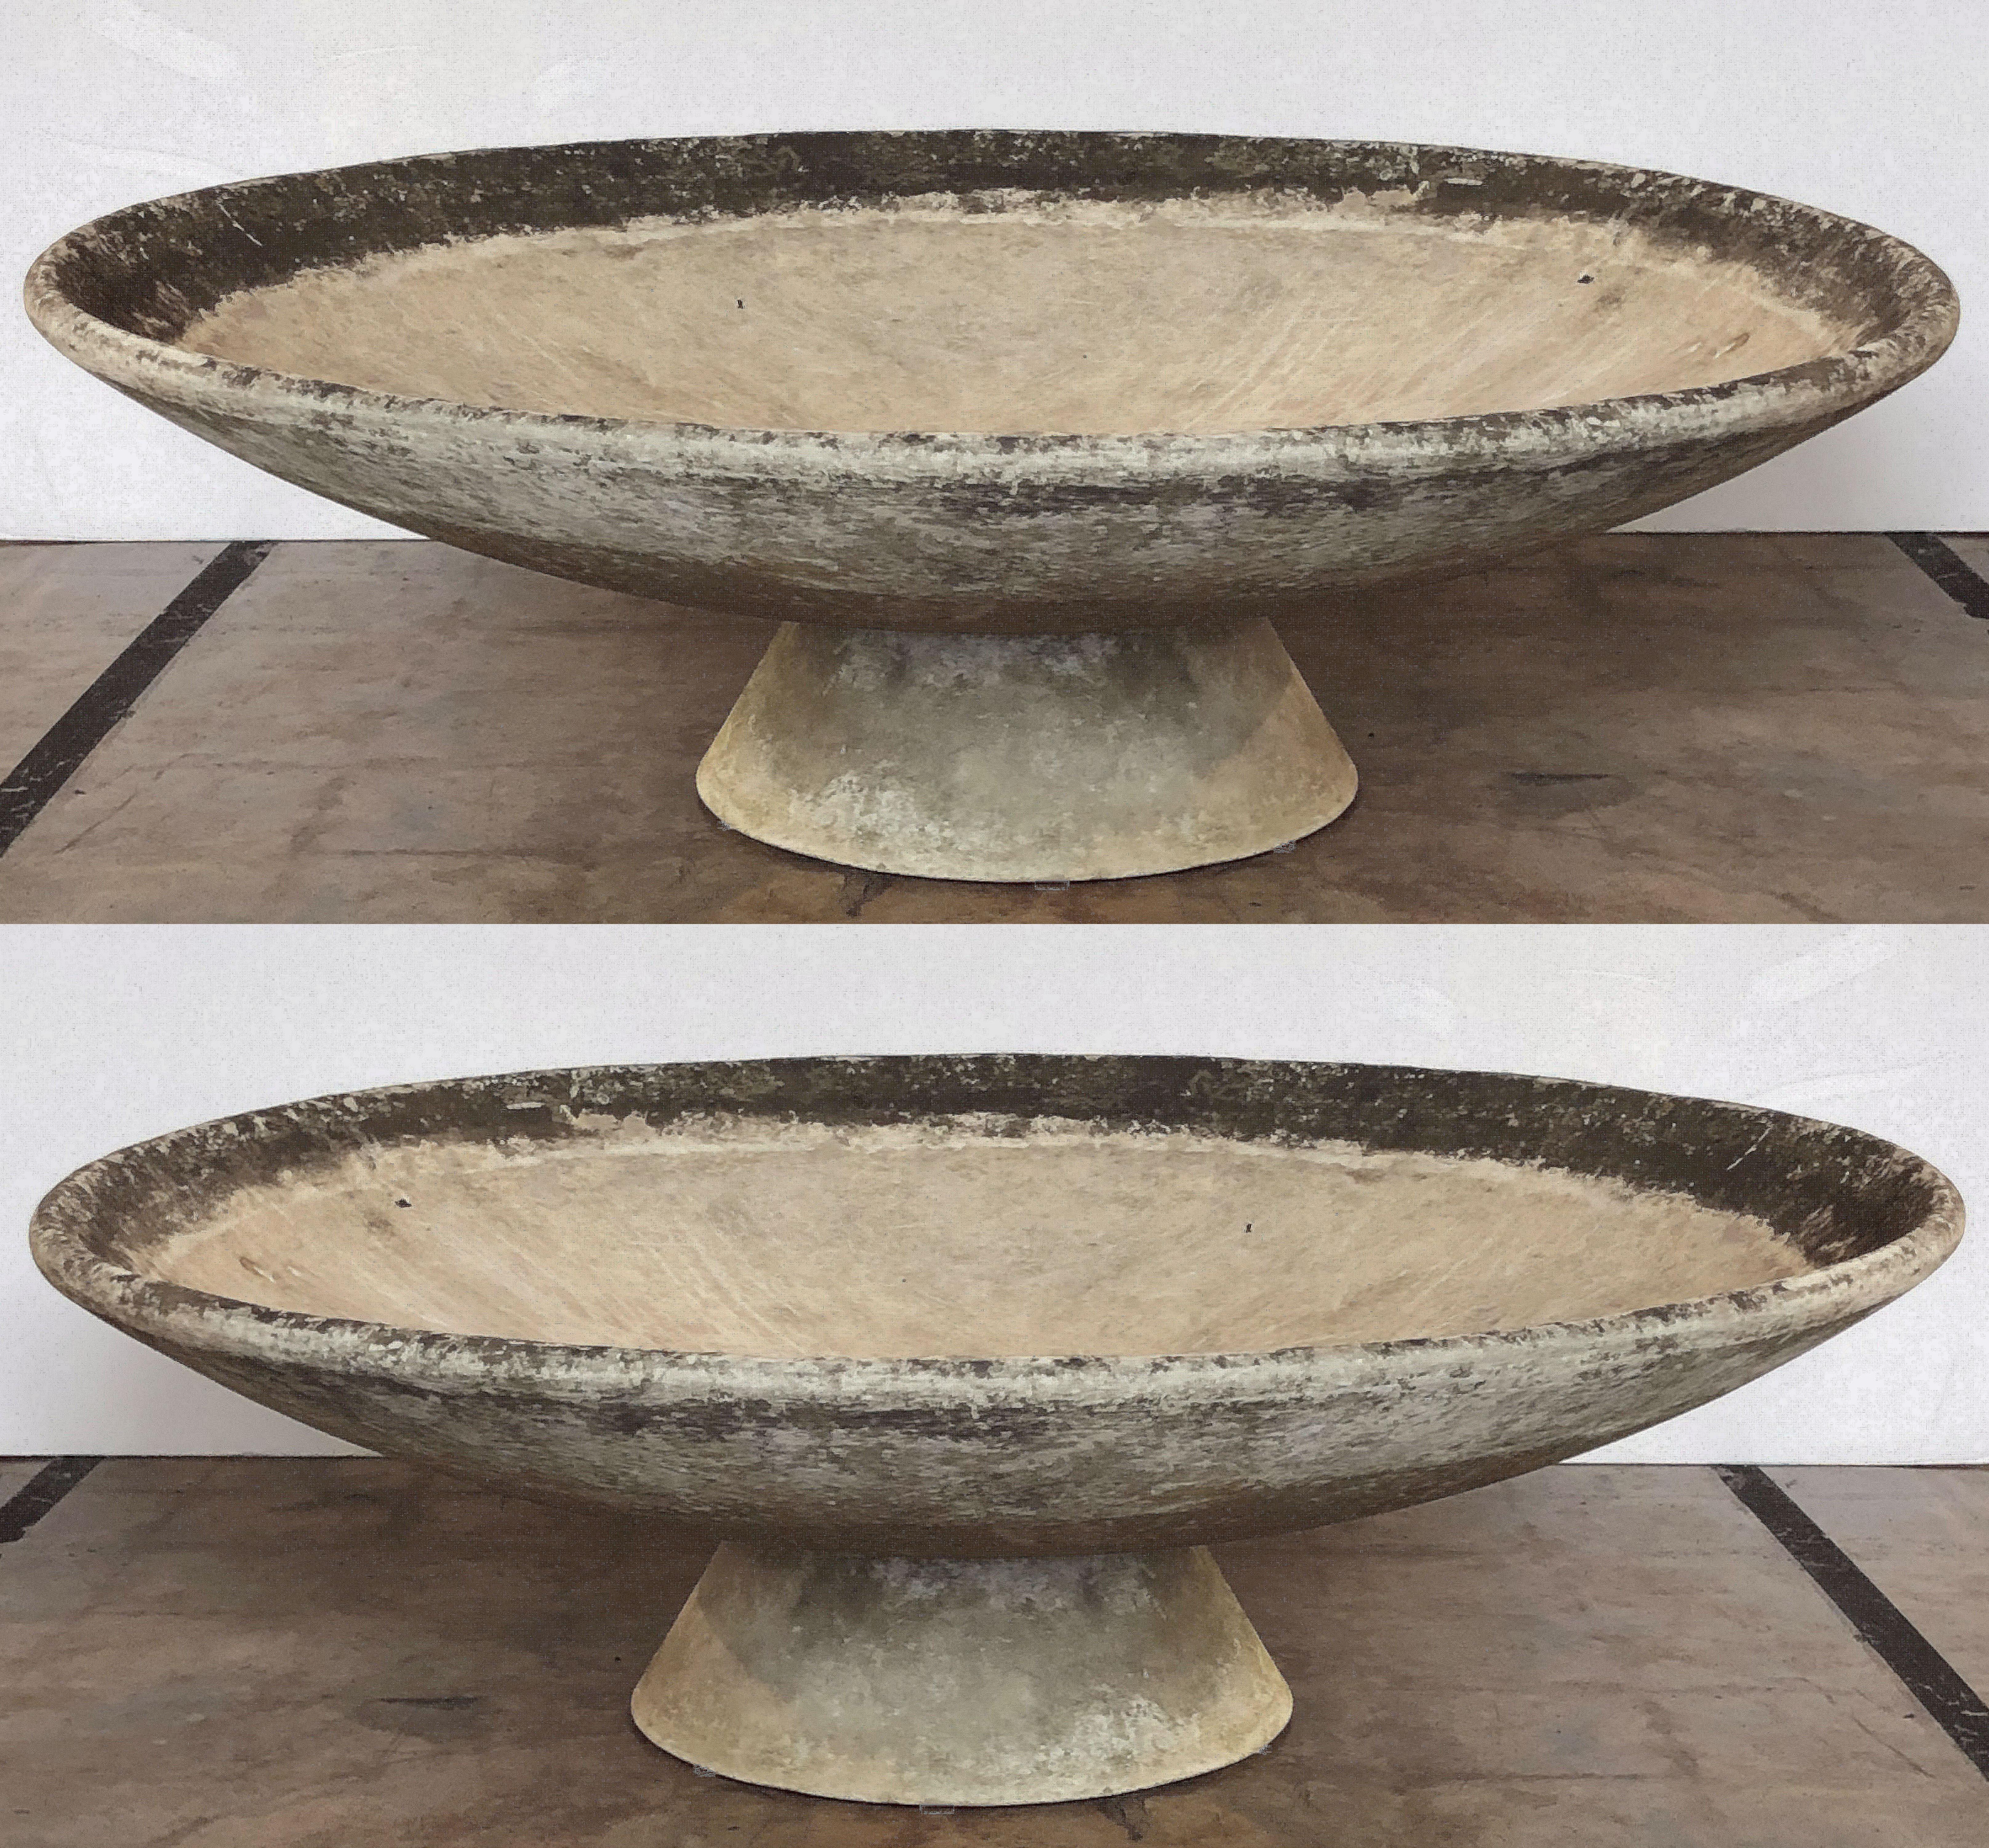 A fine pair of very large Mid-Century Modern large saucer planters of composition stone for an indoor or outdoor garden, garden room, or terrace, designed by the iconic Swiss designer, Willy Guhl. Each large round or circular discus resting on a